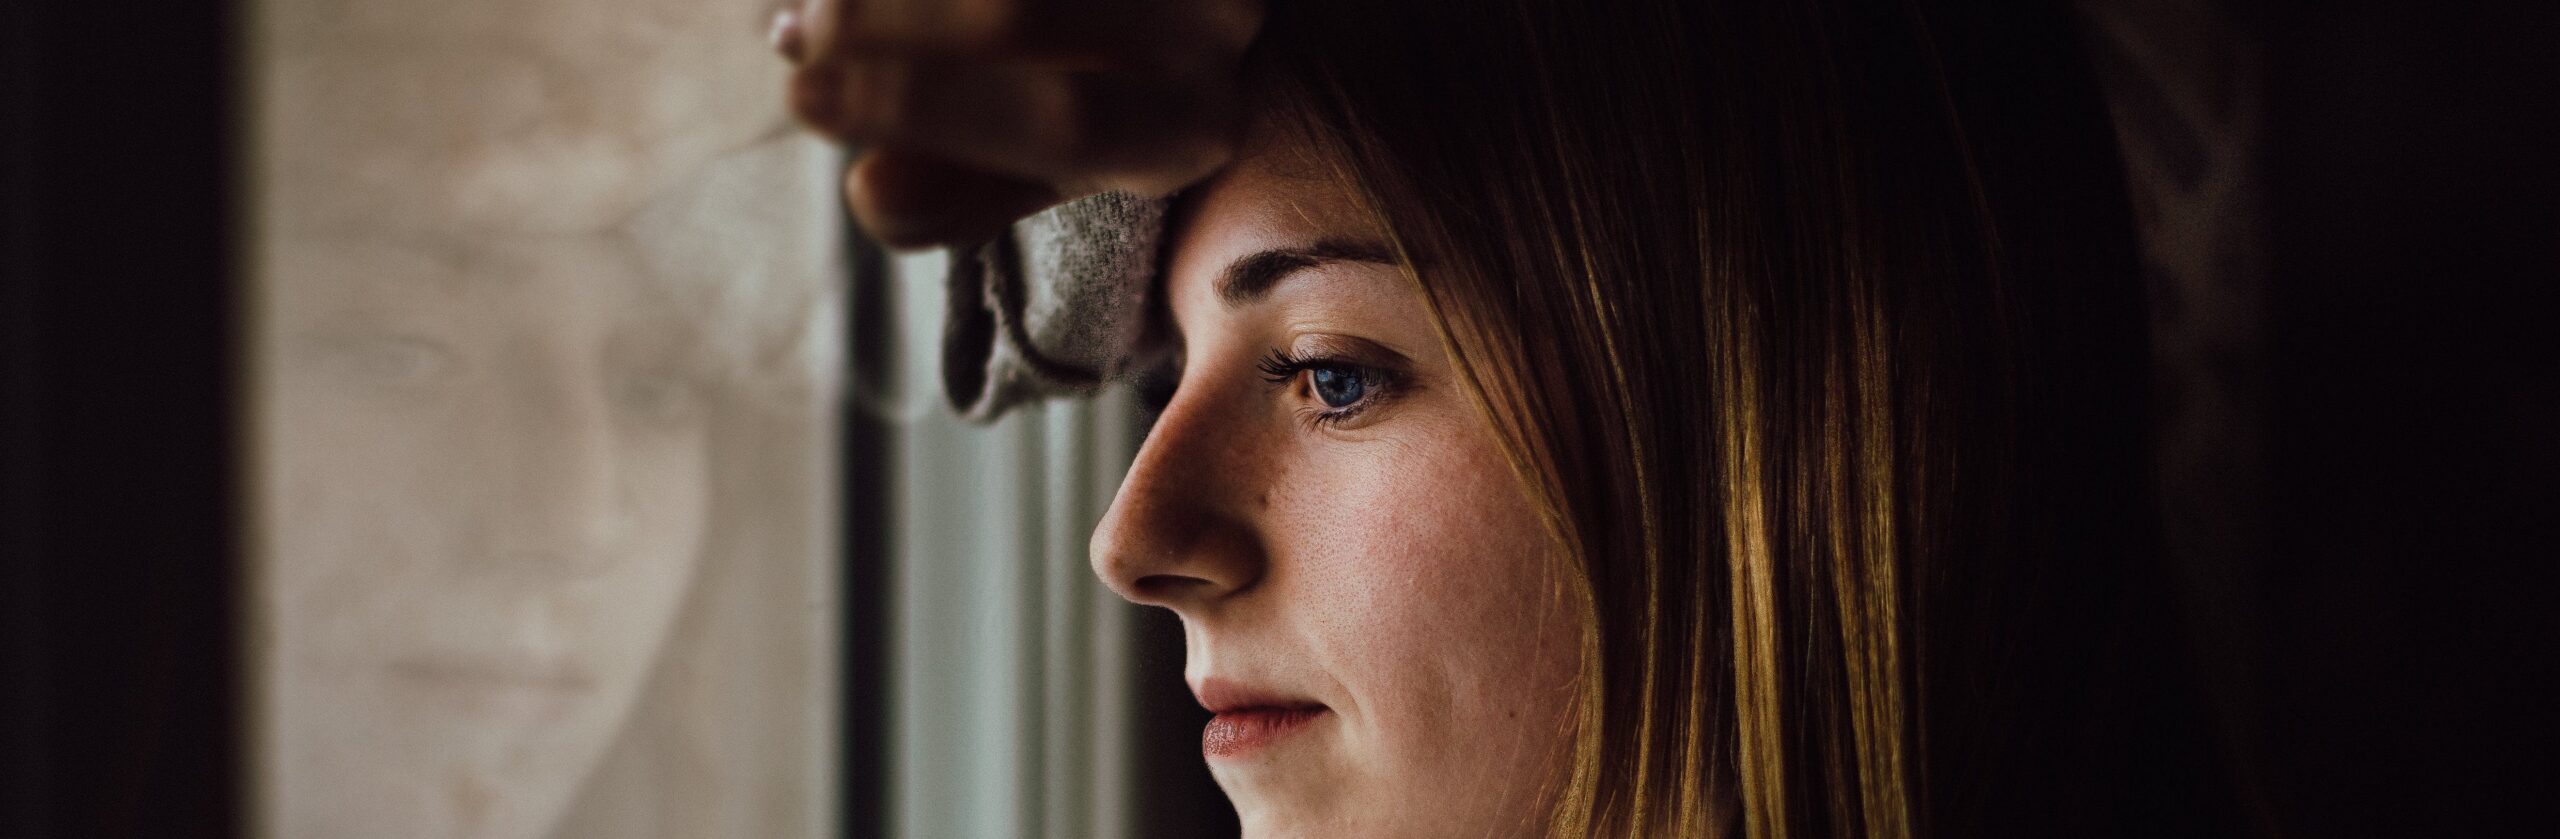 woman looking out window representing alcohol withdrawal timeline symptoms.